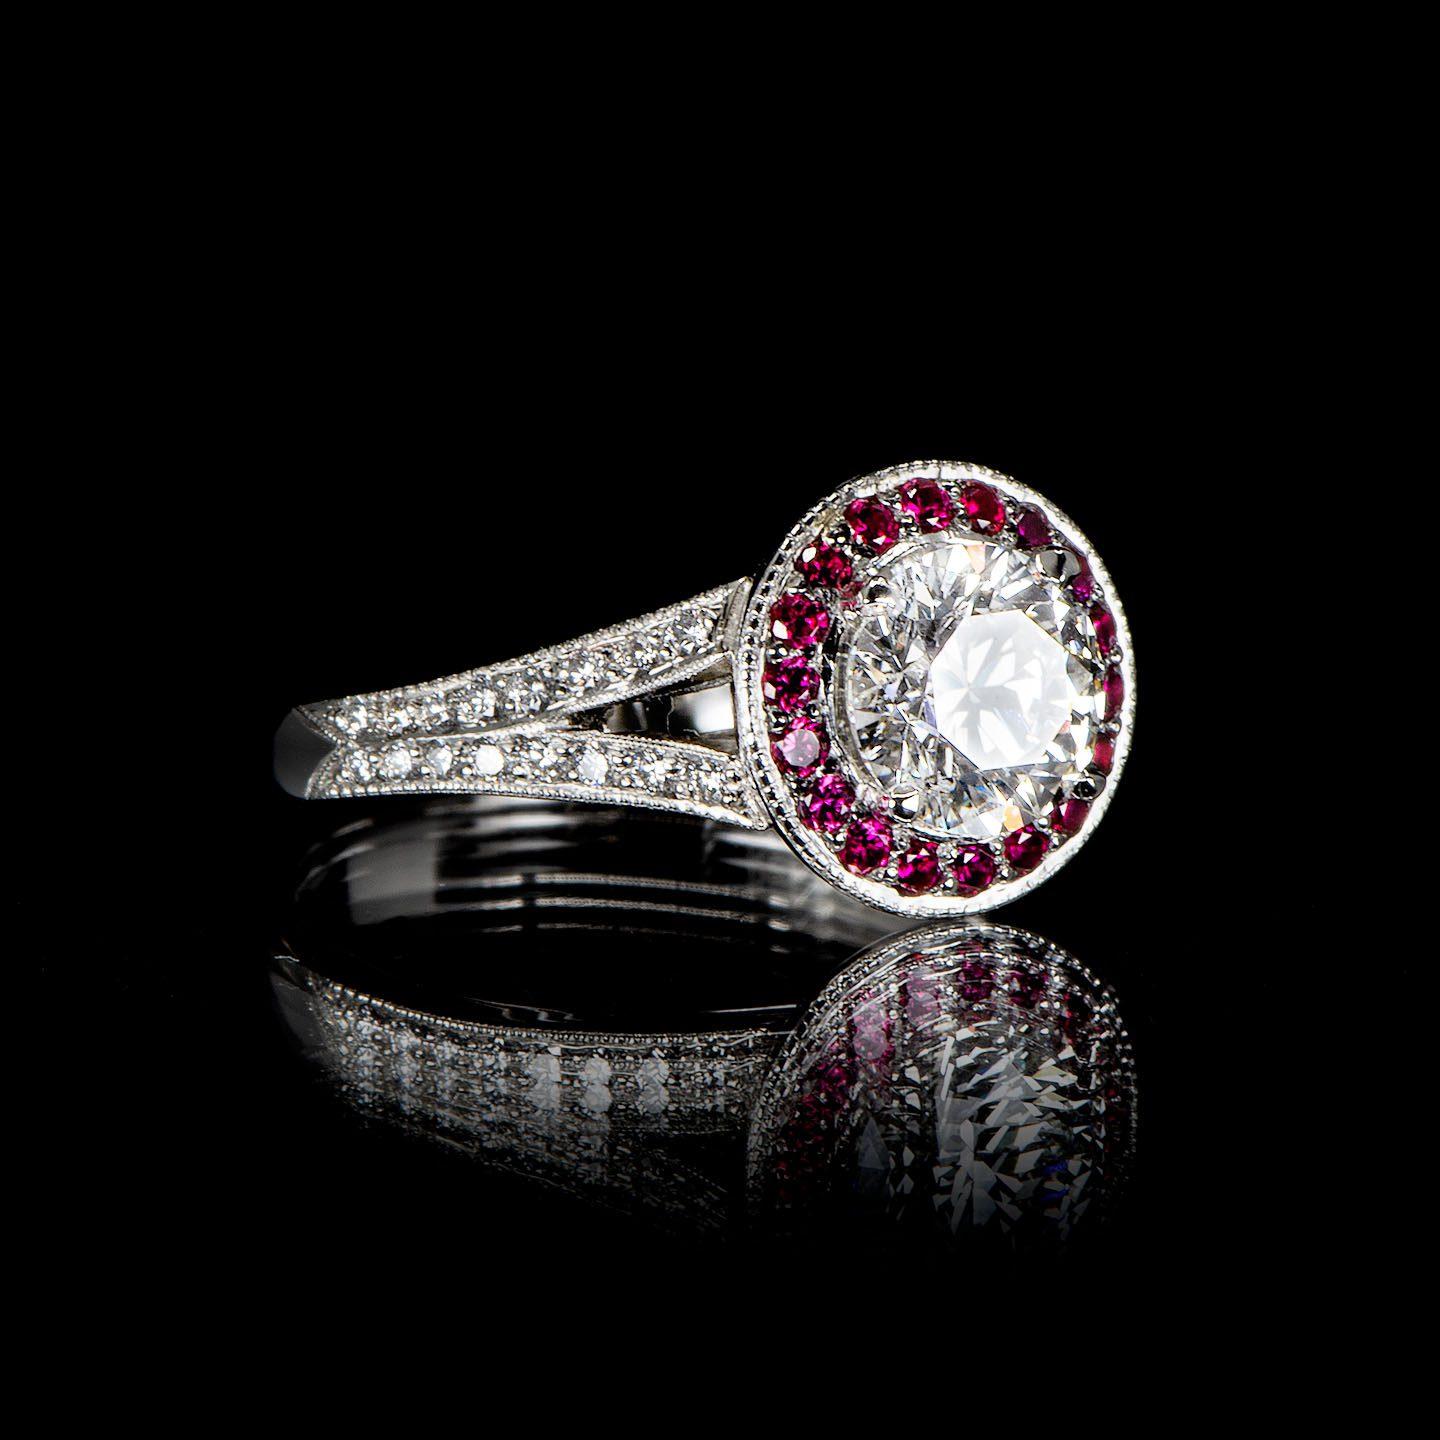 This handcrafted vintage style ring features a 1.02 carat round cut diamond (Colour G, Clarity SI2, laser inscribed, Triple Excellent HRD certificate) surrounded by rubies in a milgrain cluster (halo) setting with black rhodium which sets off their